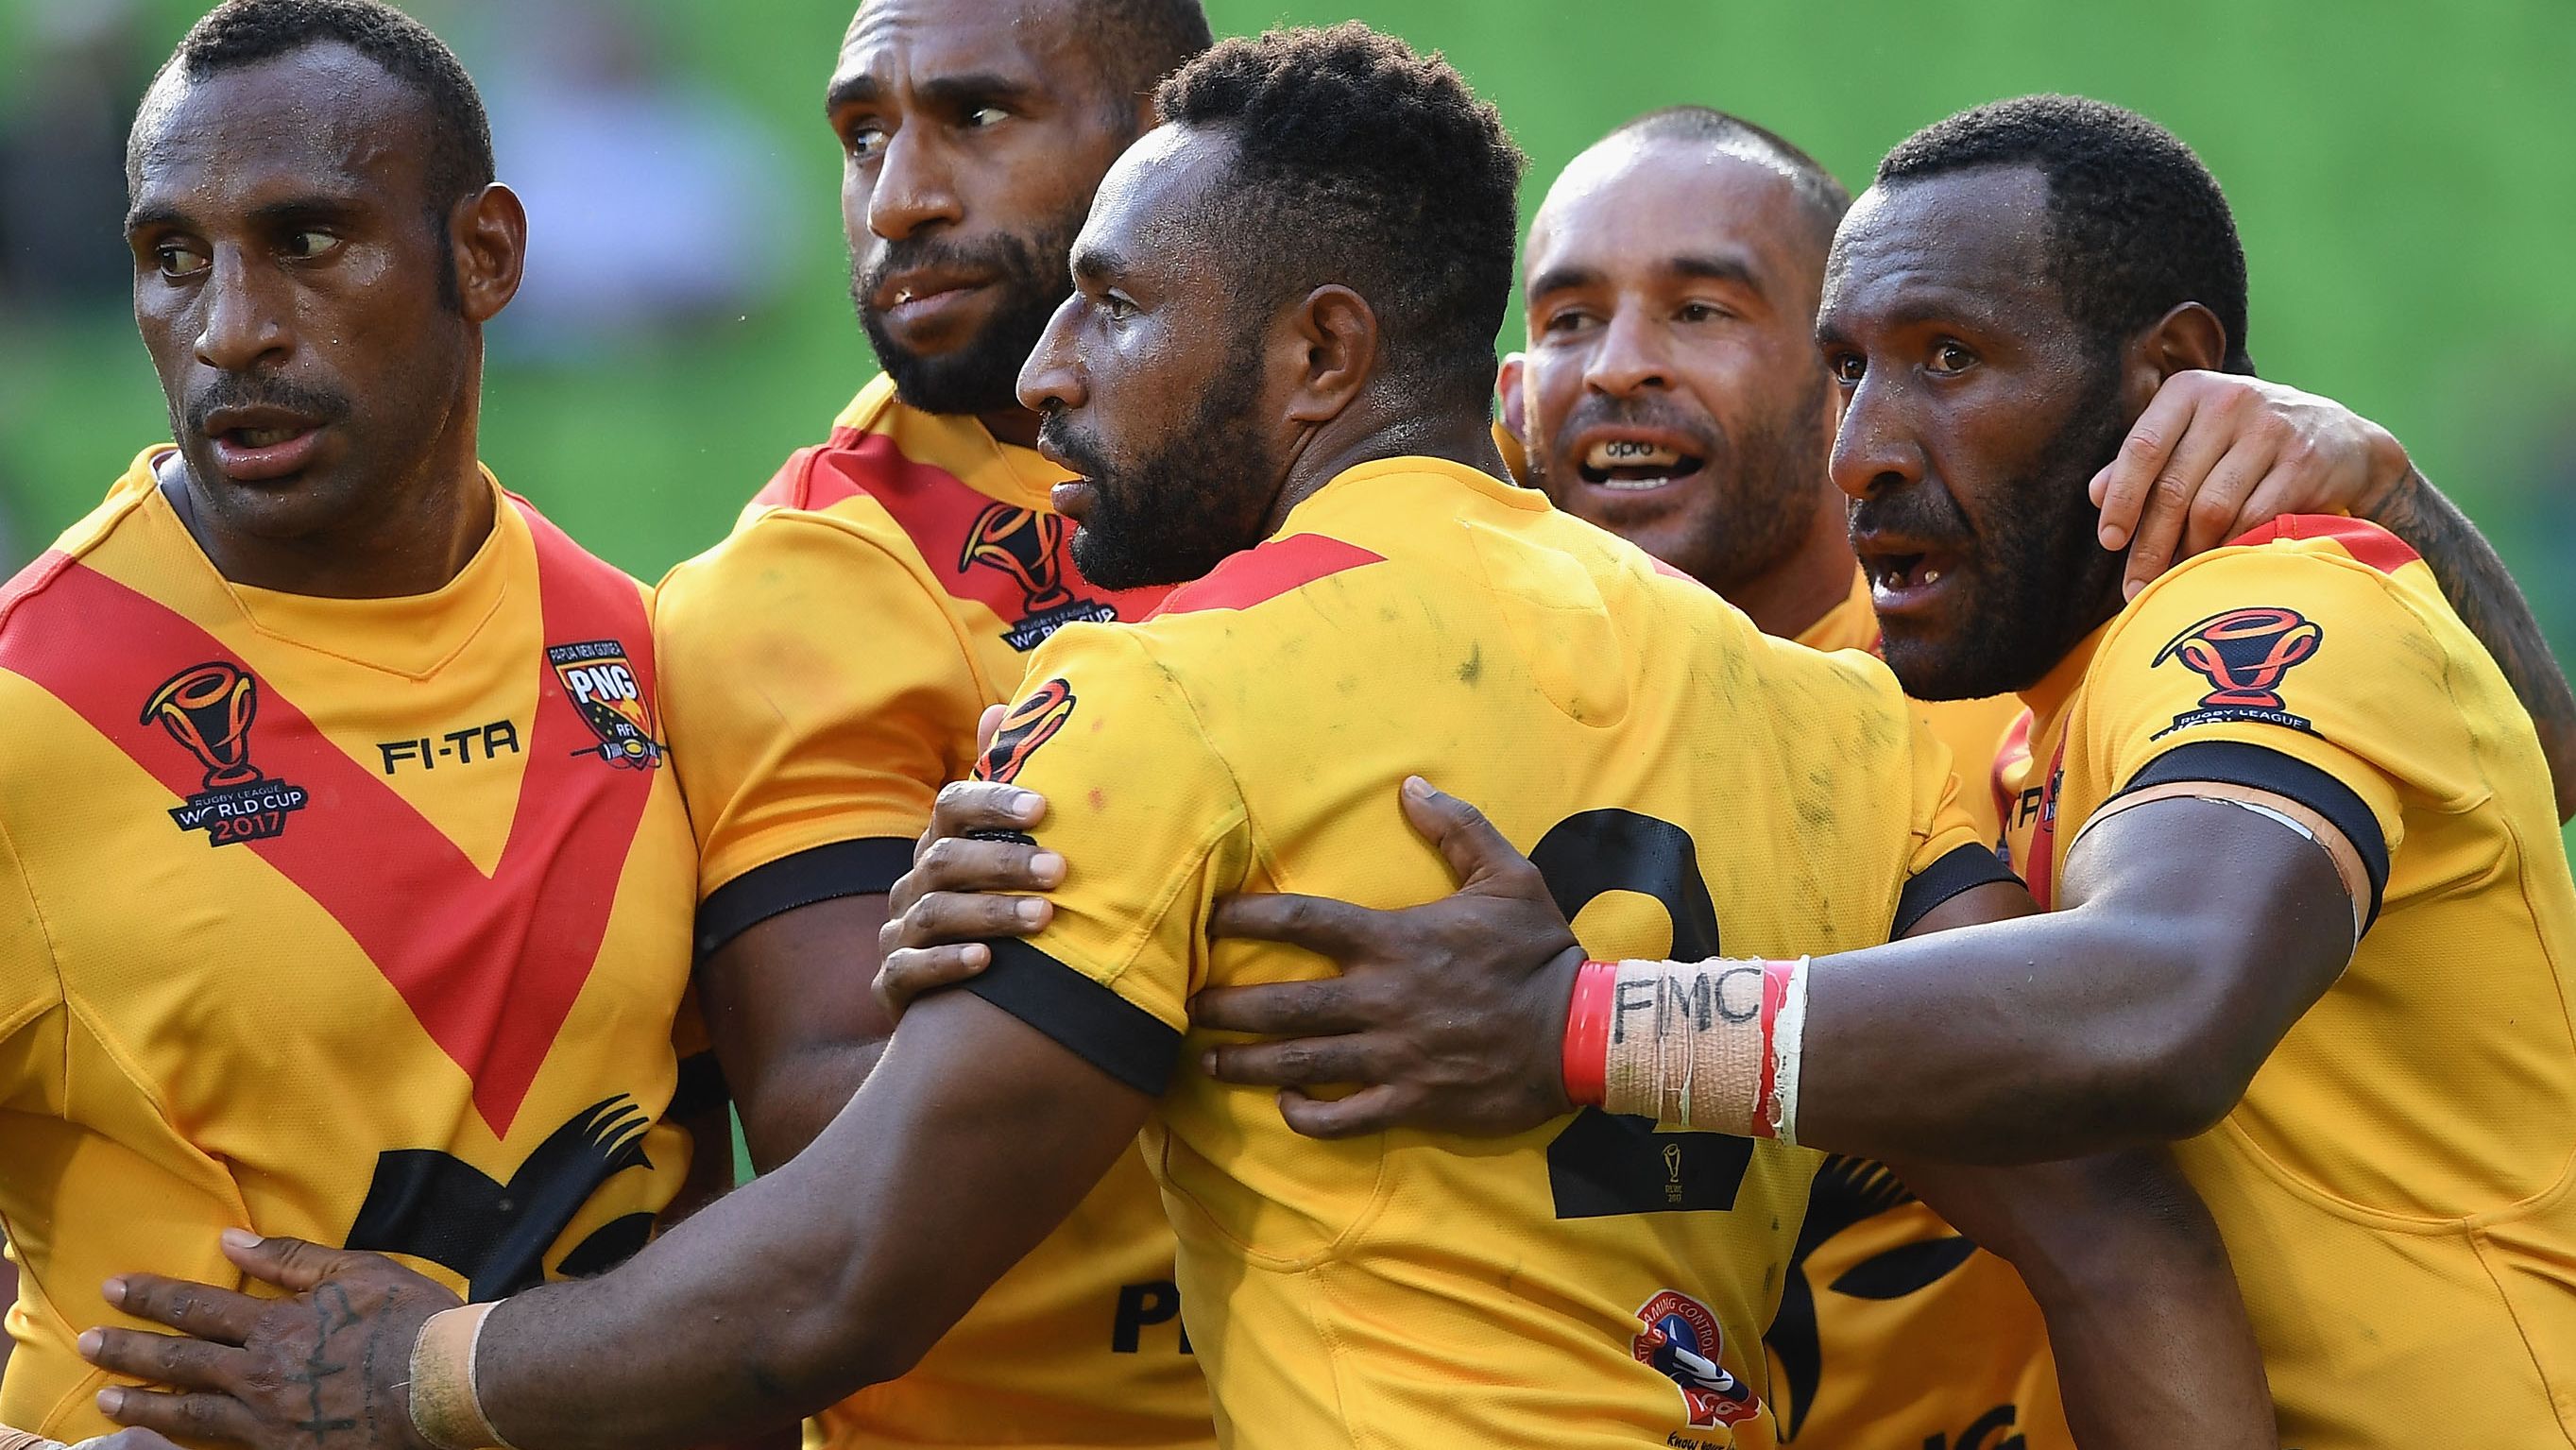 Papua New Guinea Kumuls players celebrate a try against England at the 2017 Rugby League World Cup quarter finals.